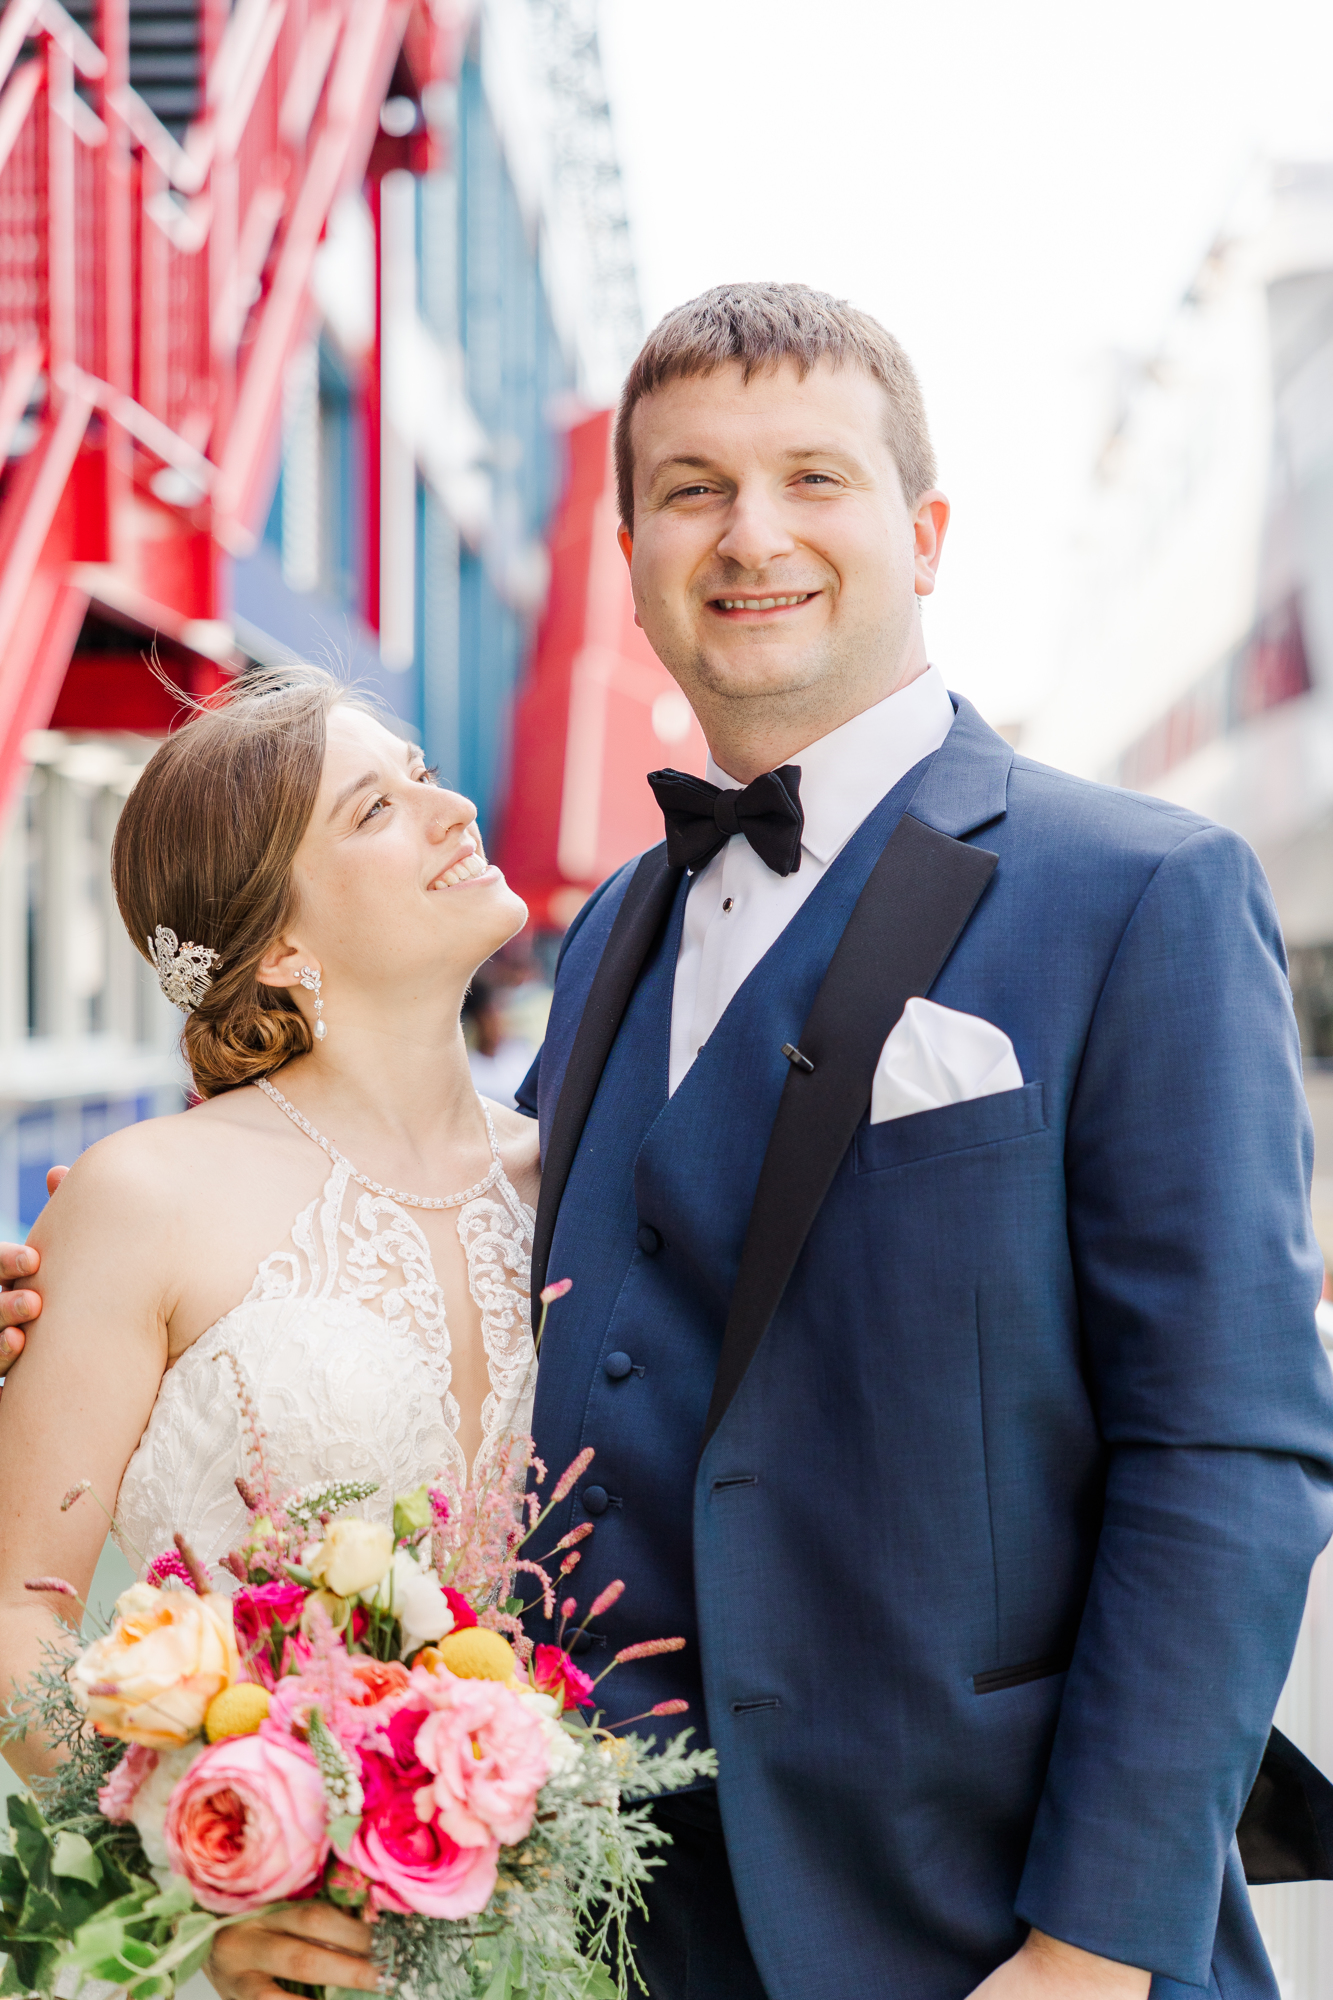 Documentary Wedding Photography in New York City on a Boat